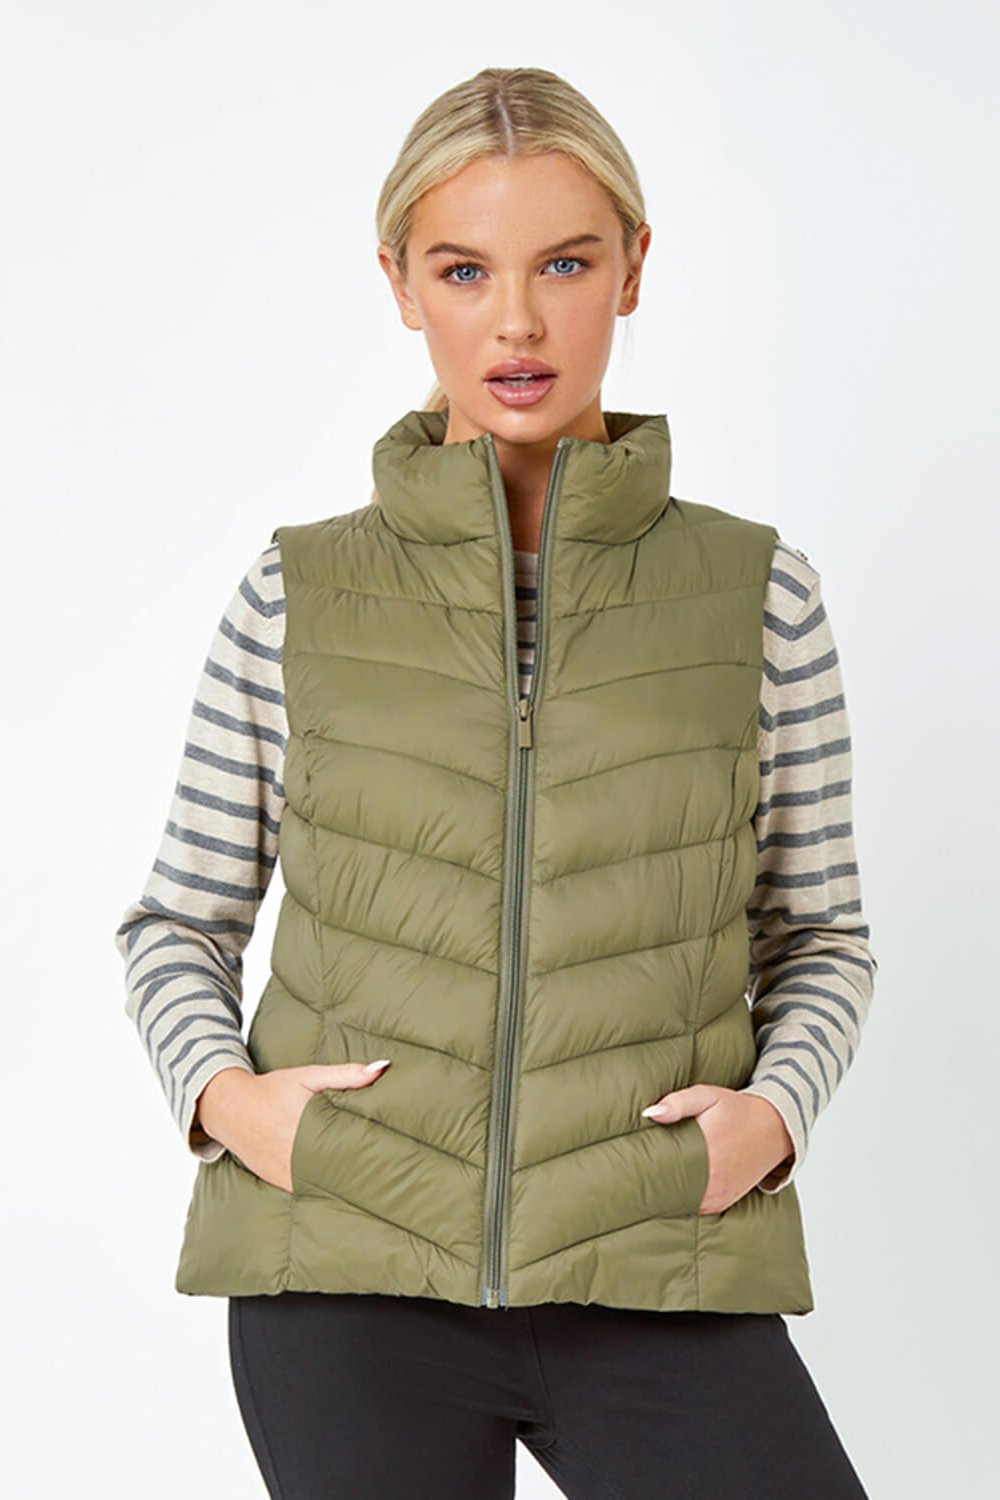 KHAKI Petite Quilted Padded Gilet, Image 5 of 5